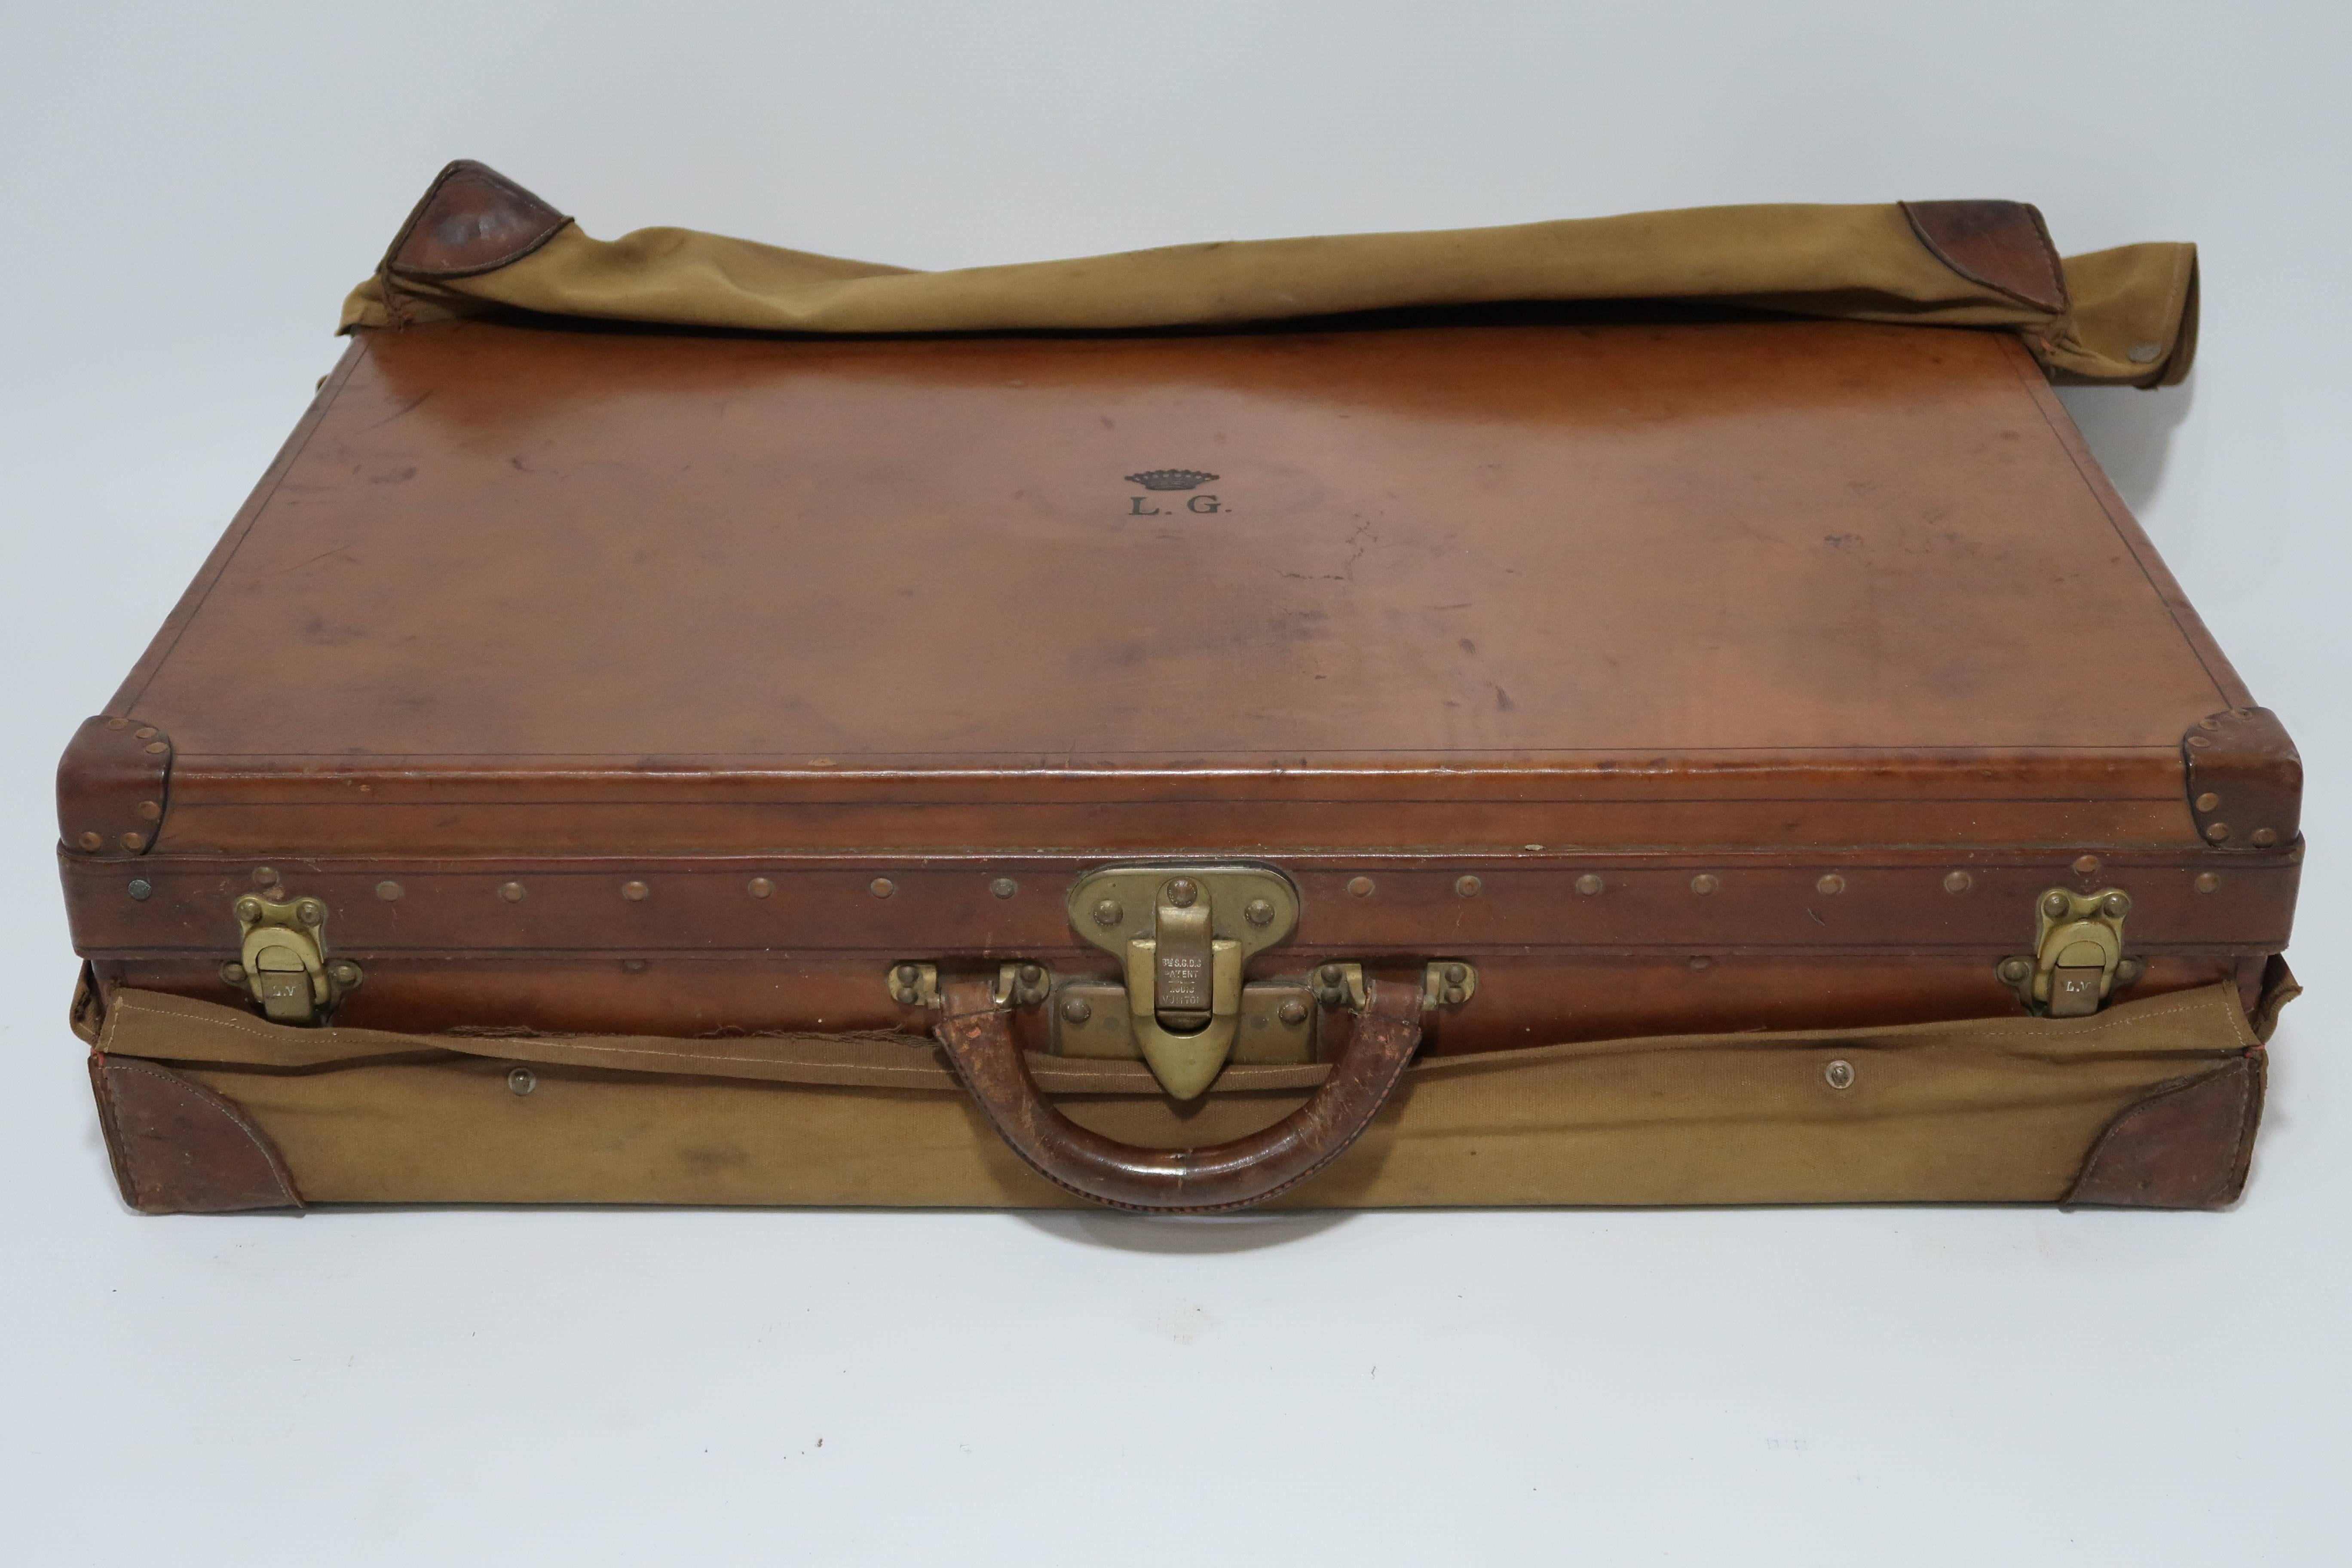 For sale an antique Louis Vuitton leather case with engraved crown and the original LV cover.
In very good condition with a great patina and interesting but not confirmed provenance.